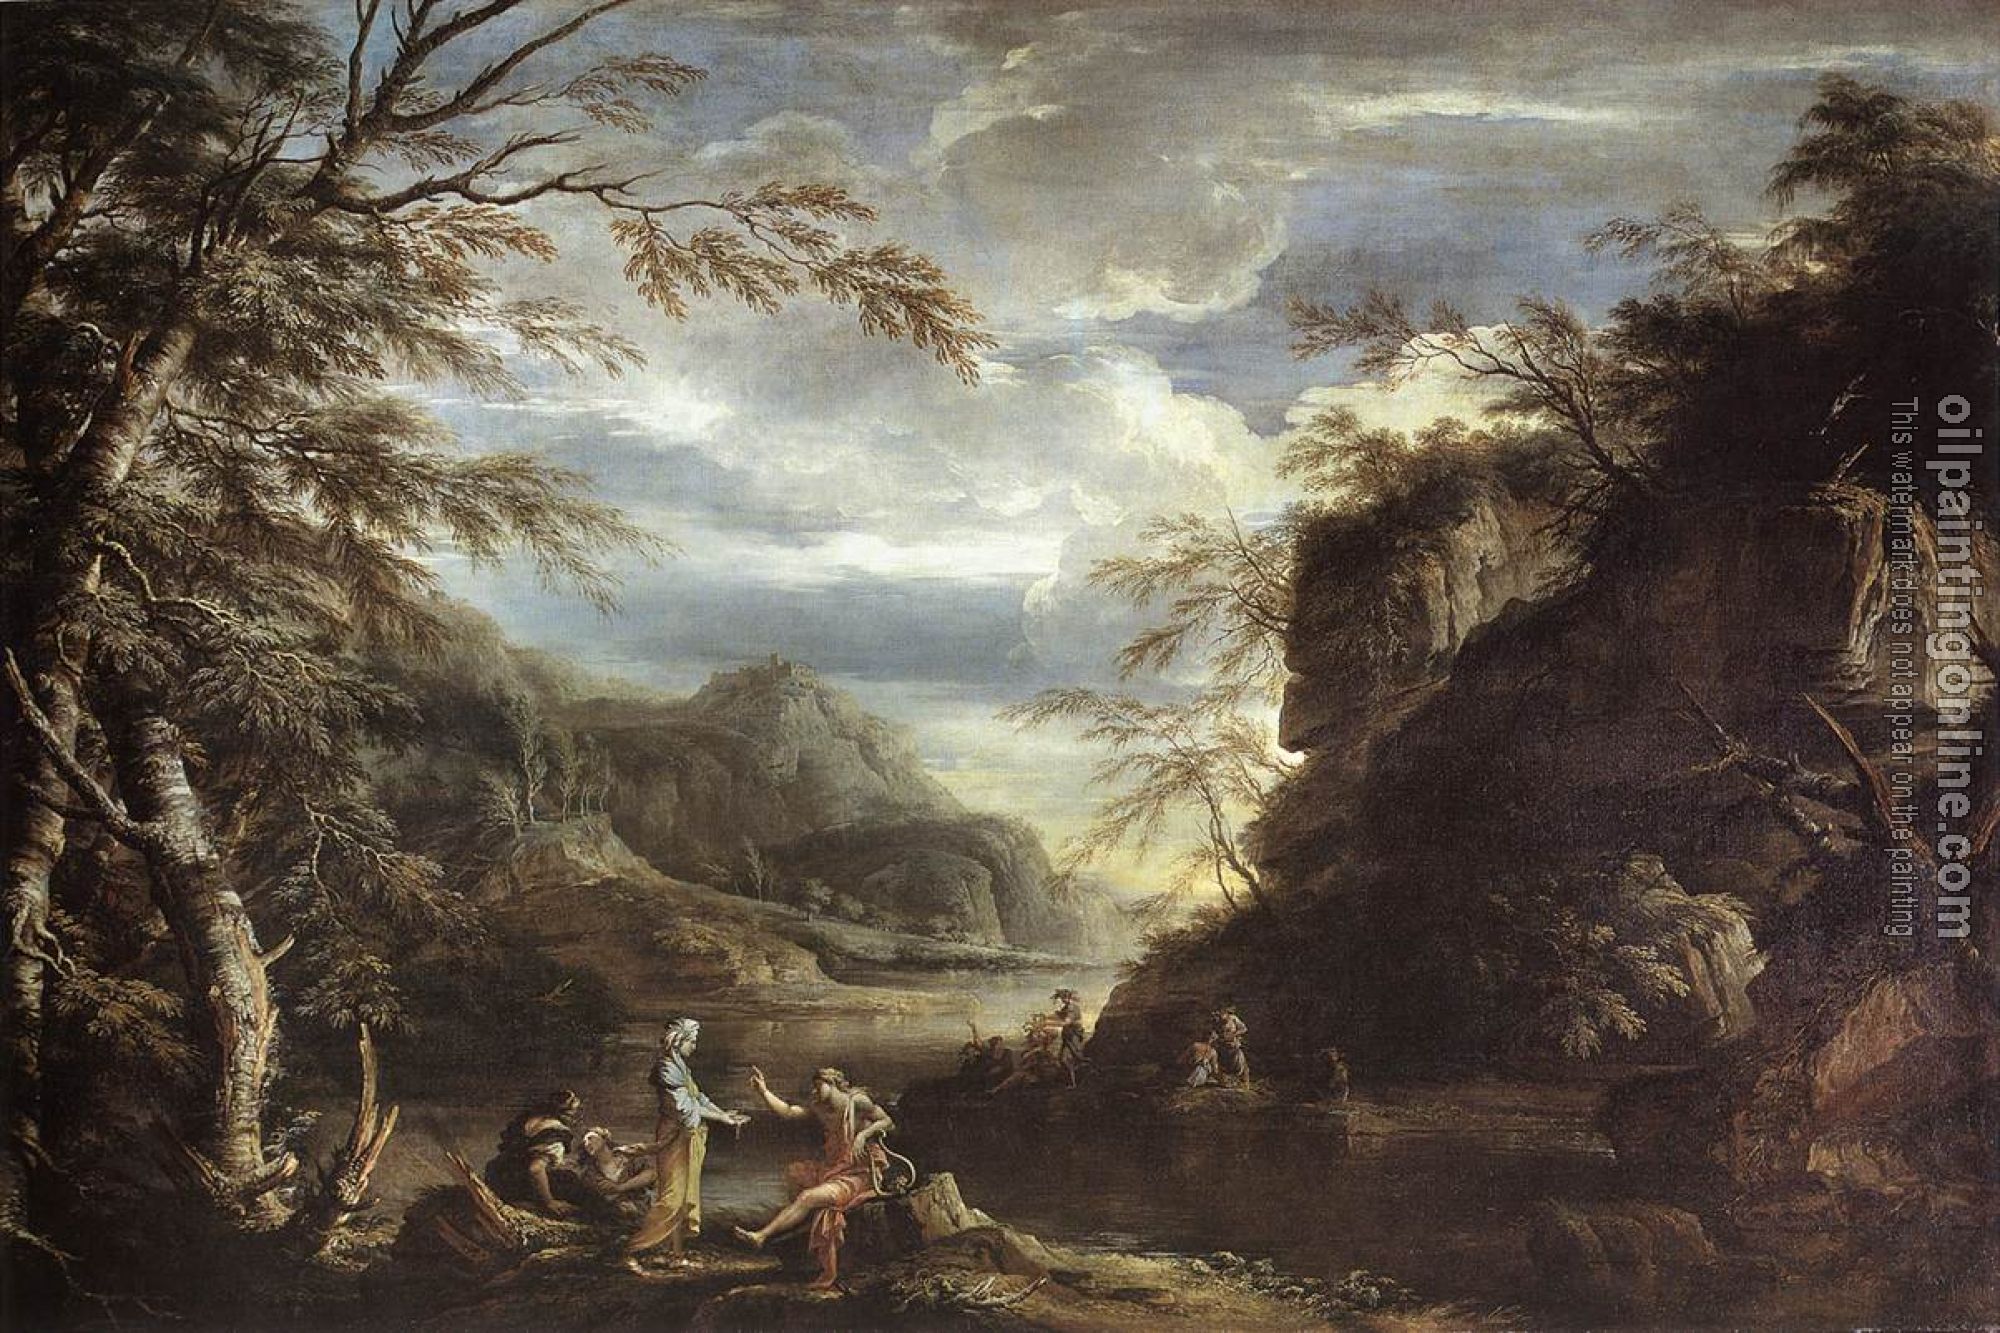 Rosa, Salvator - River Landscape with Apollo and the Cumean Sibyl